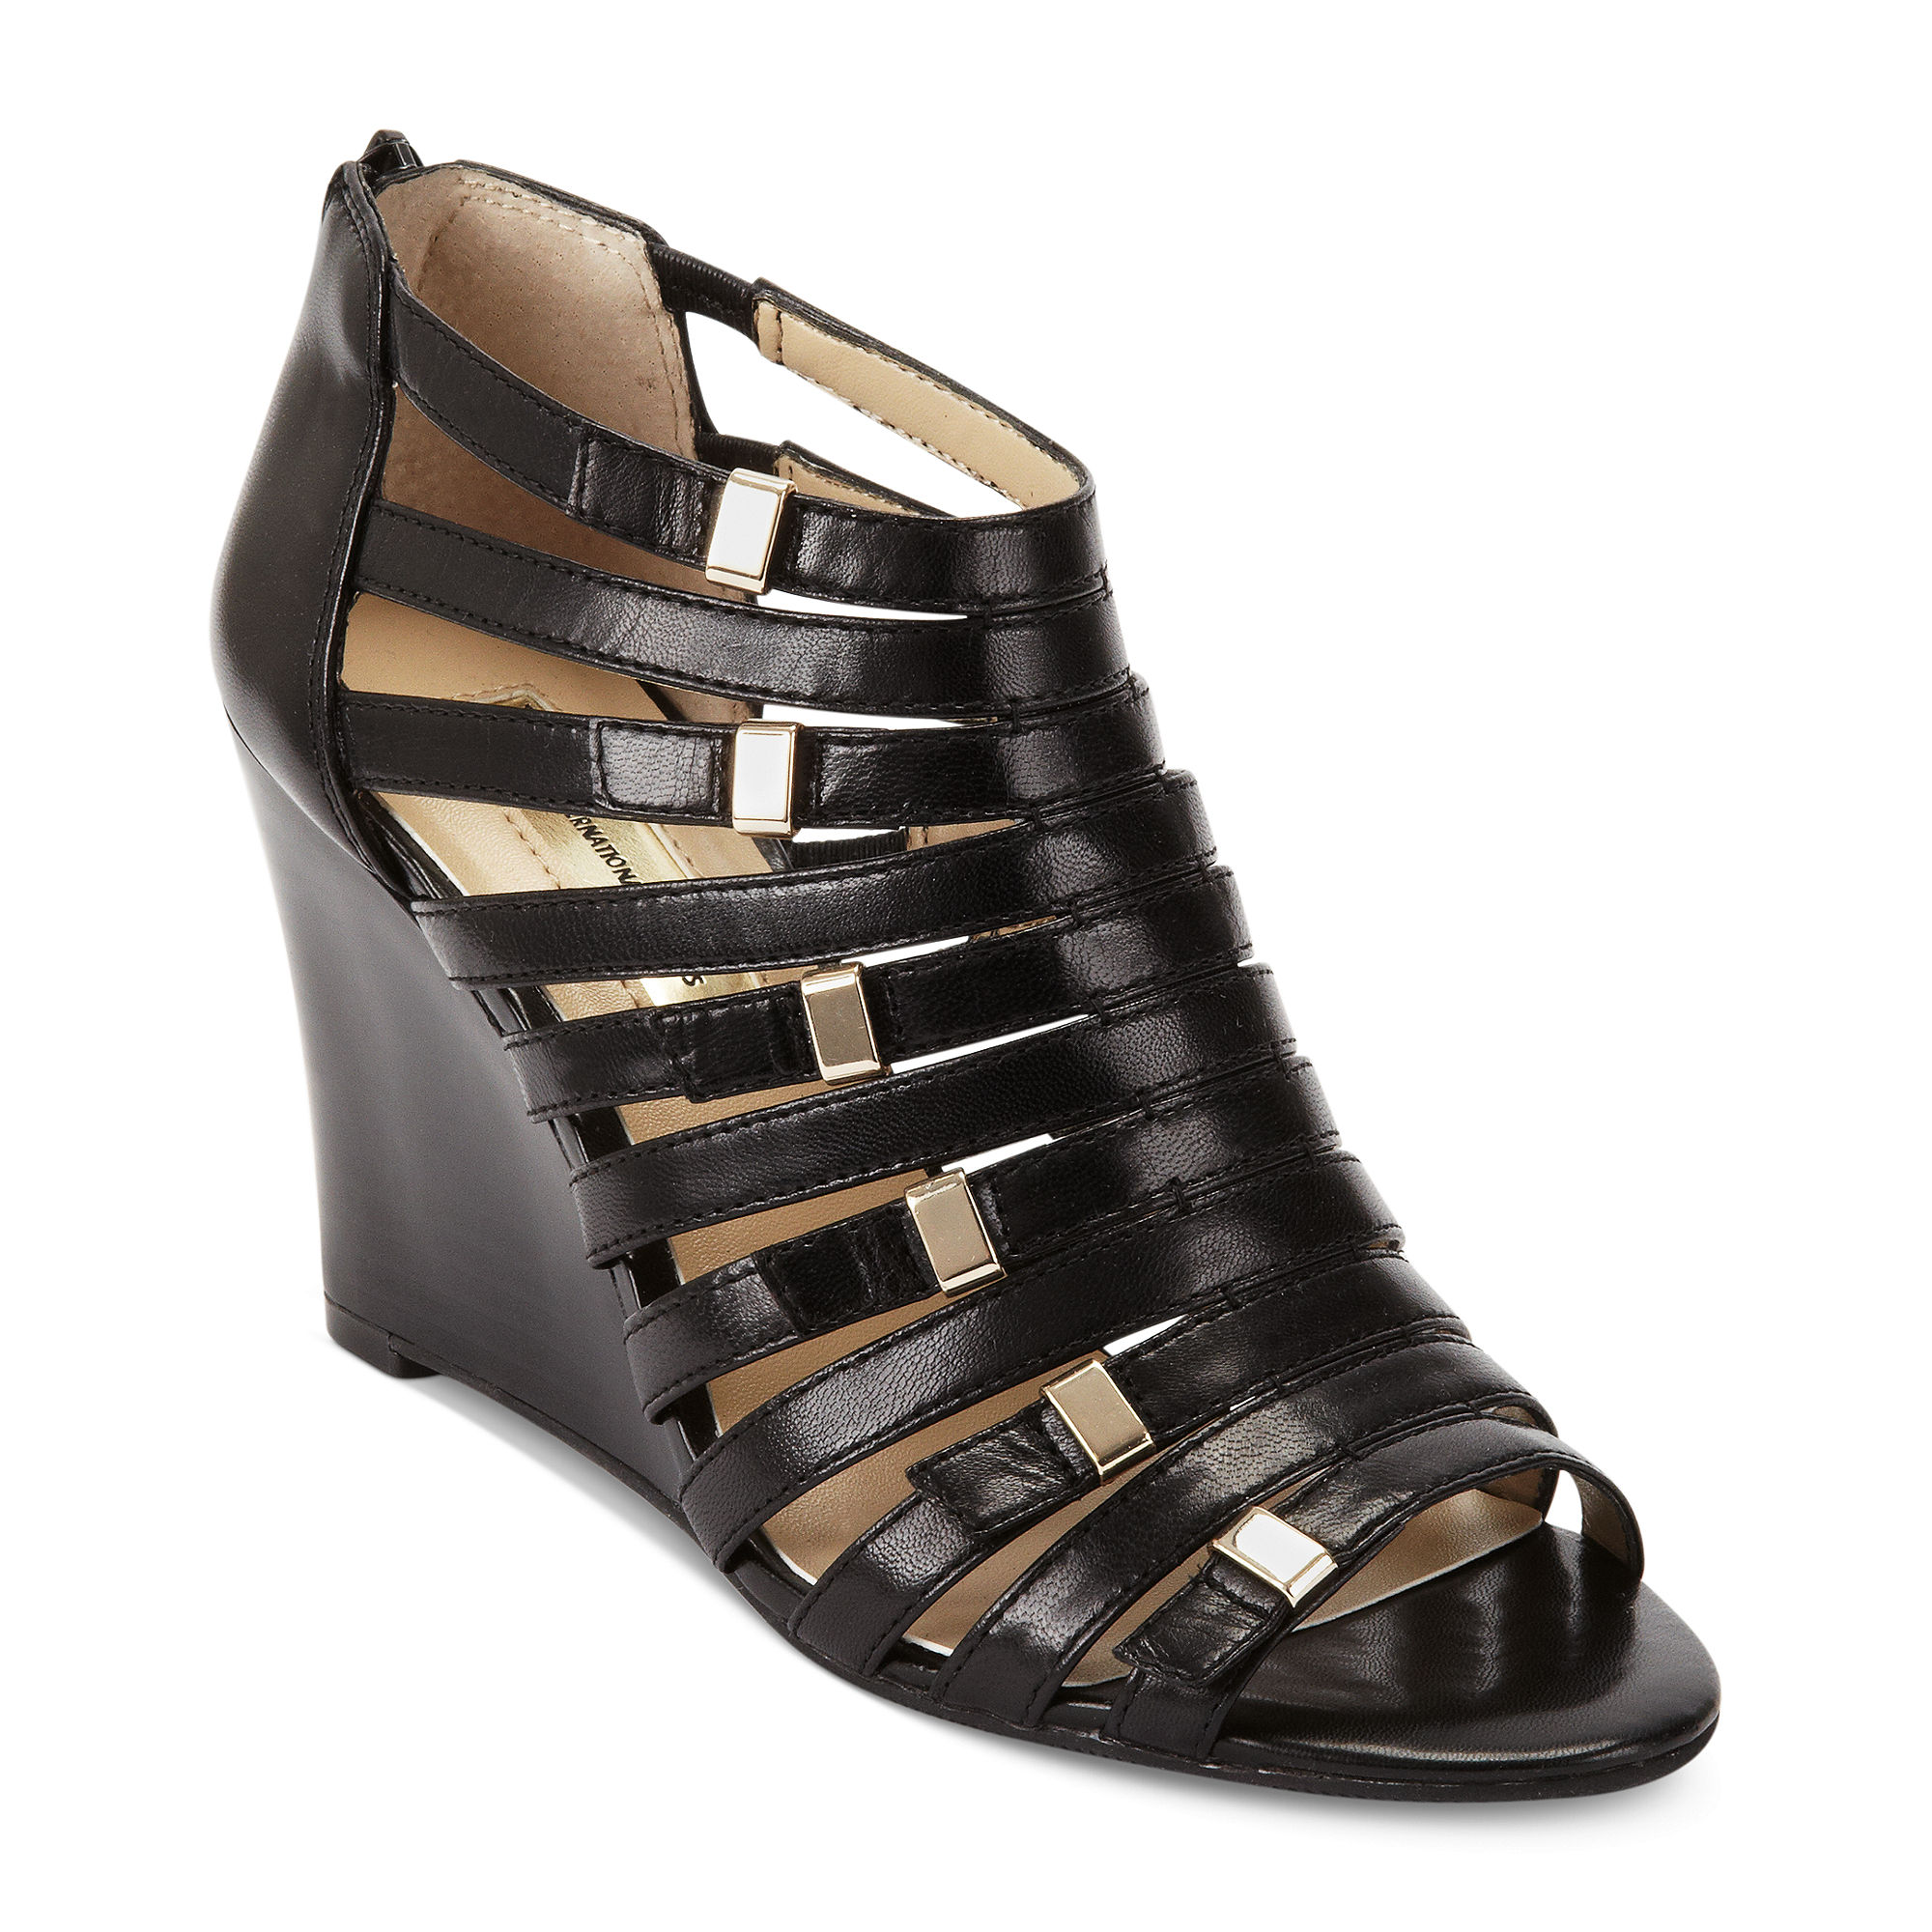 INC International Concepts Dionne Wedge Sandals in Black - Lyst